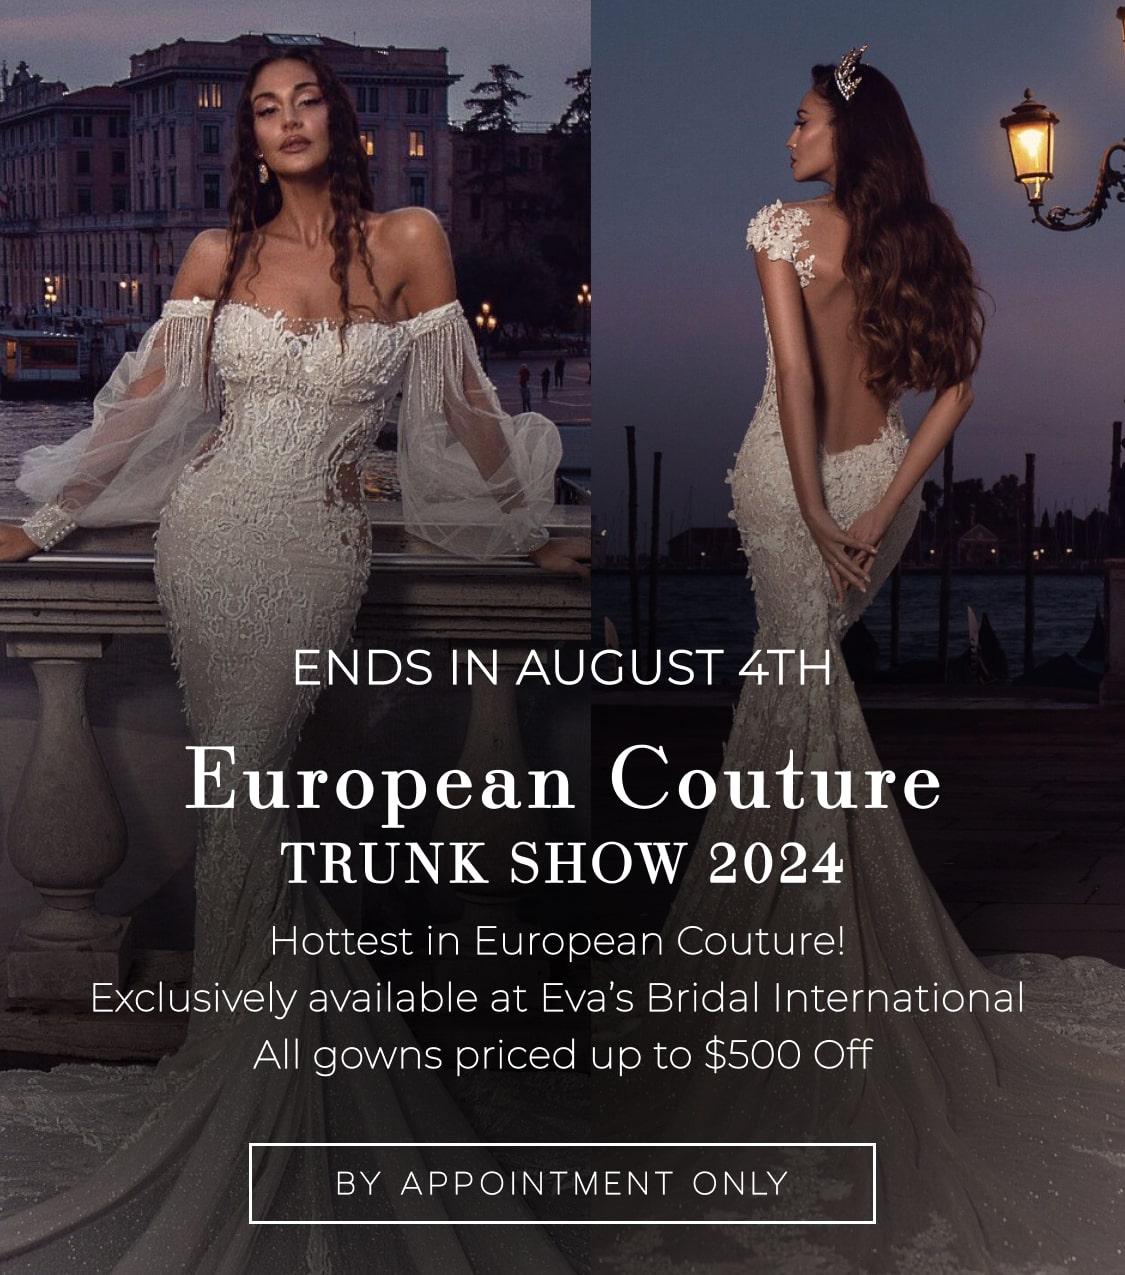 European Couture Trunk Show 2024 banner for mobile